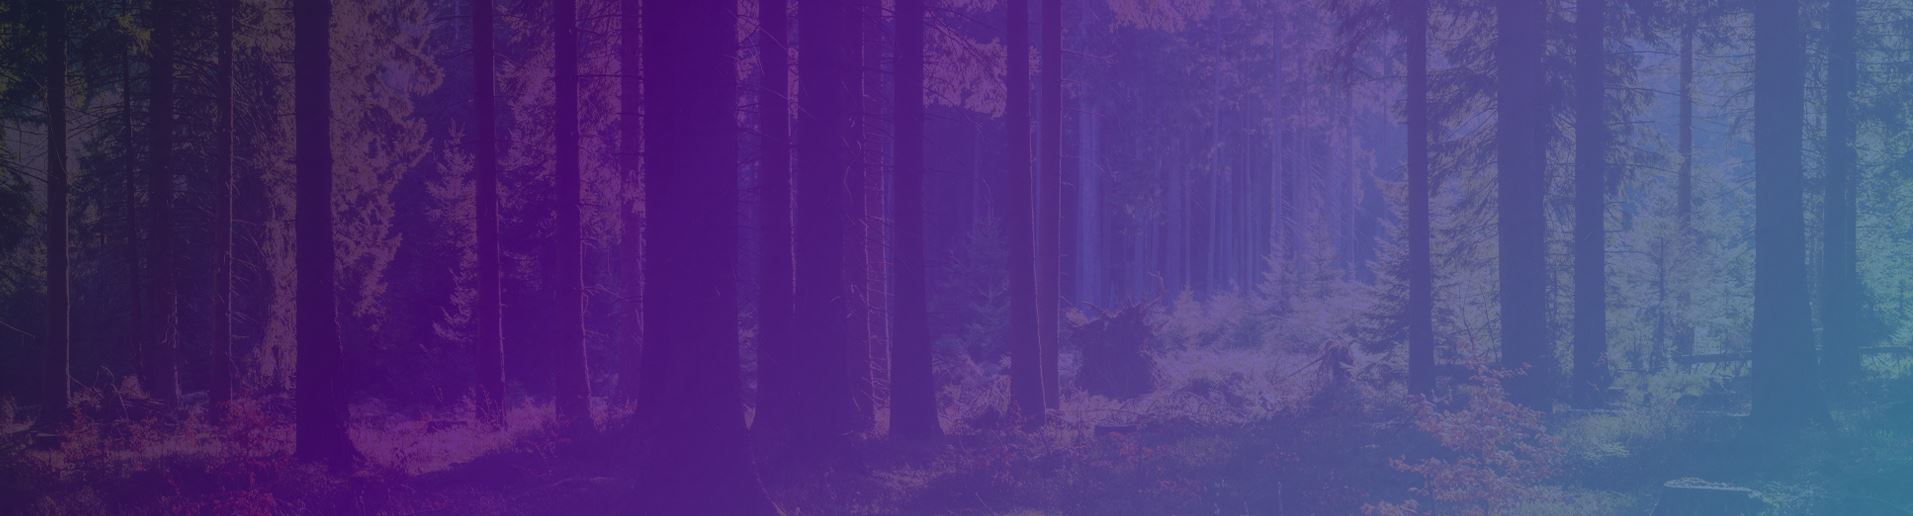 Website banner for HP Sustainable print solutions showing forest